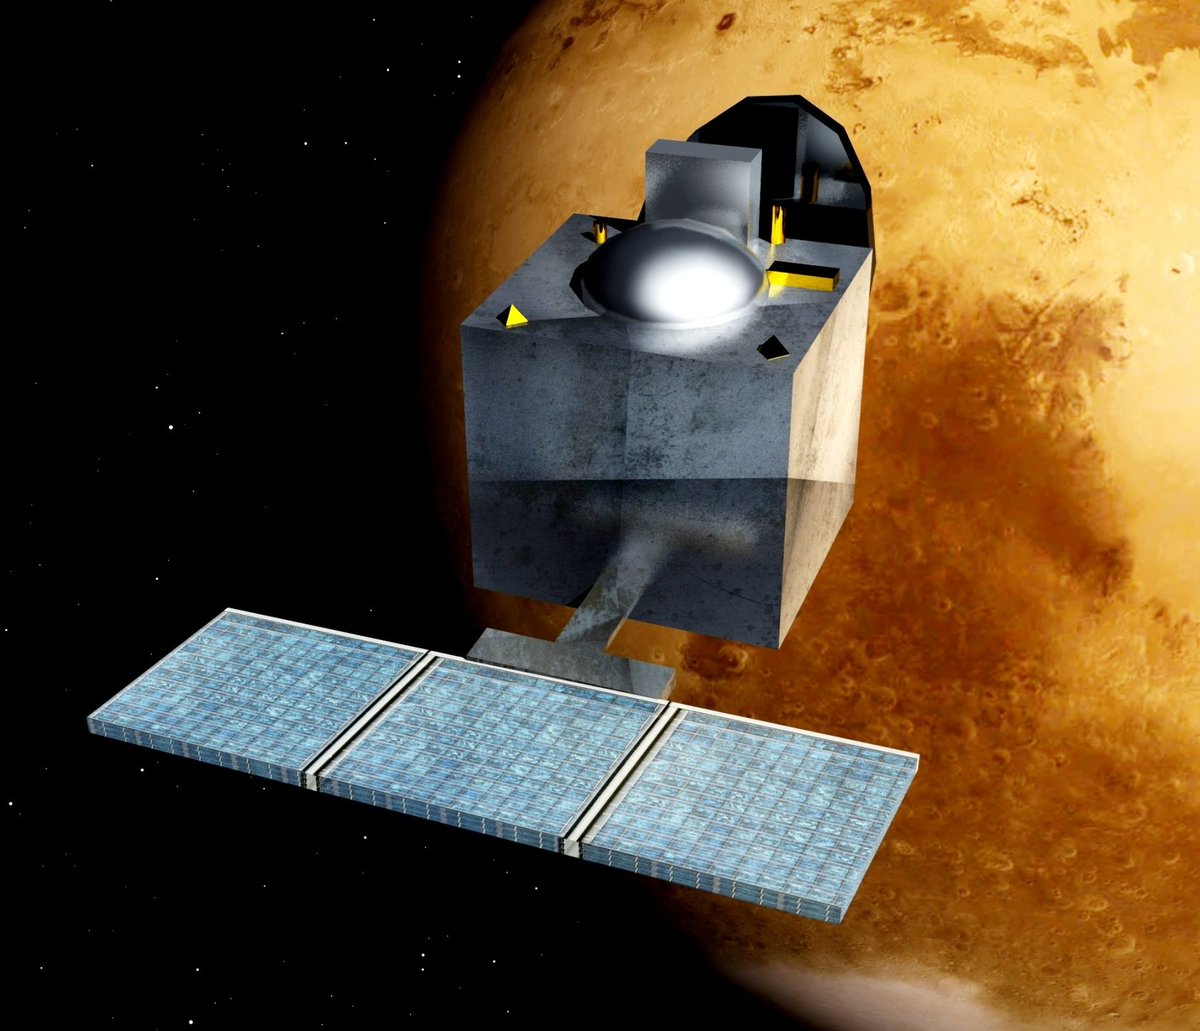 #ISRO is planning to send a Communication Relay Orbiter to the #Mars before sending the Mars Lander Mission.